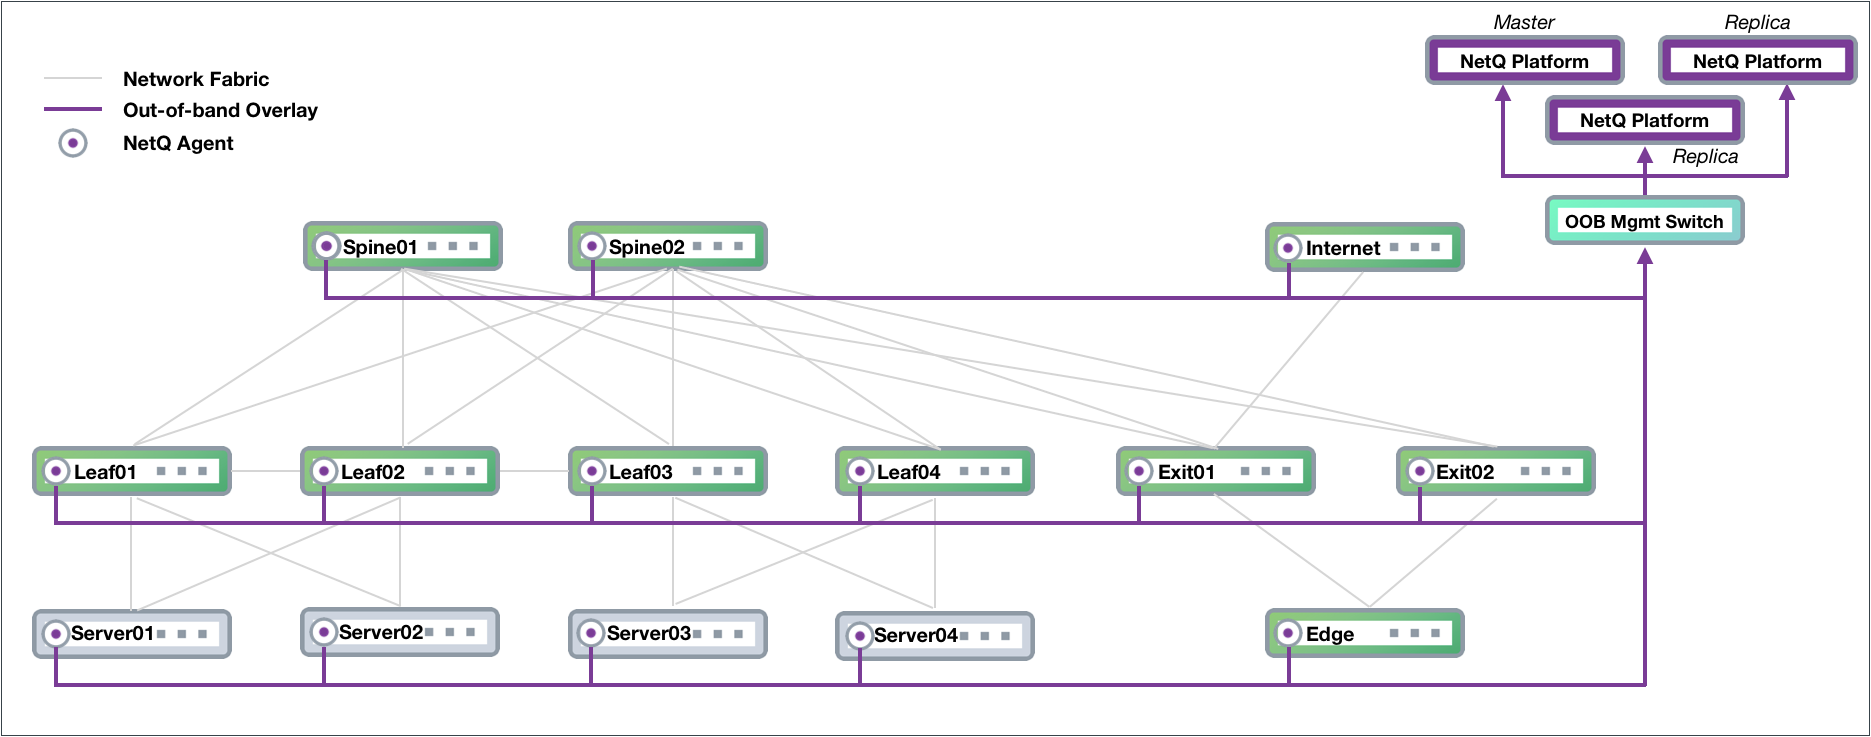 diagram of a high availability deployment with one master and two worker NetQ platforms.